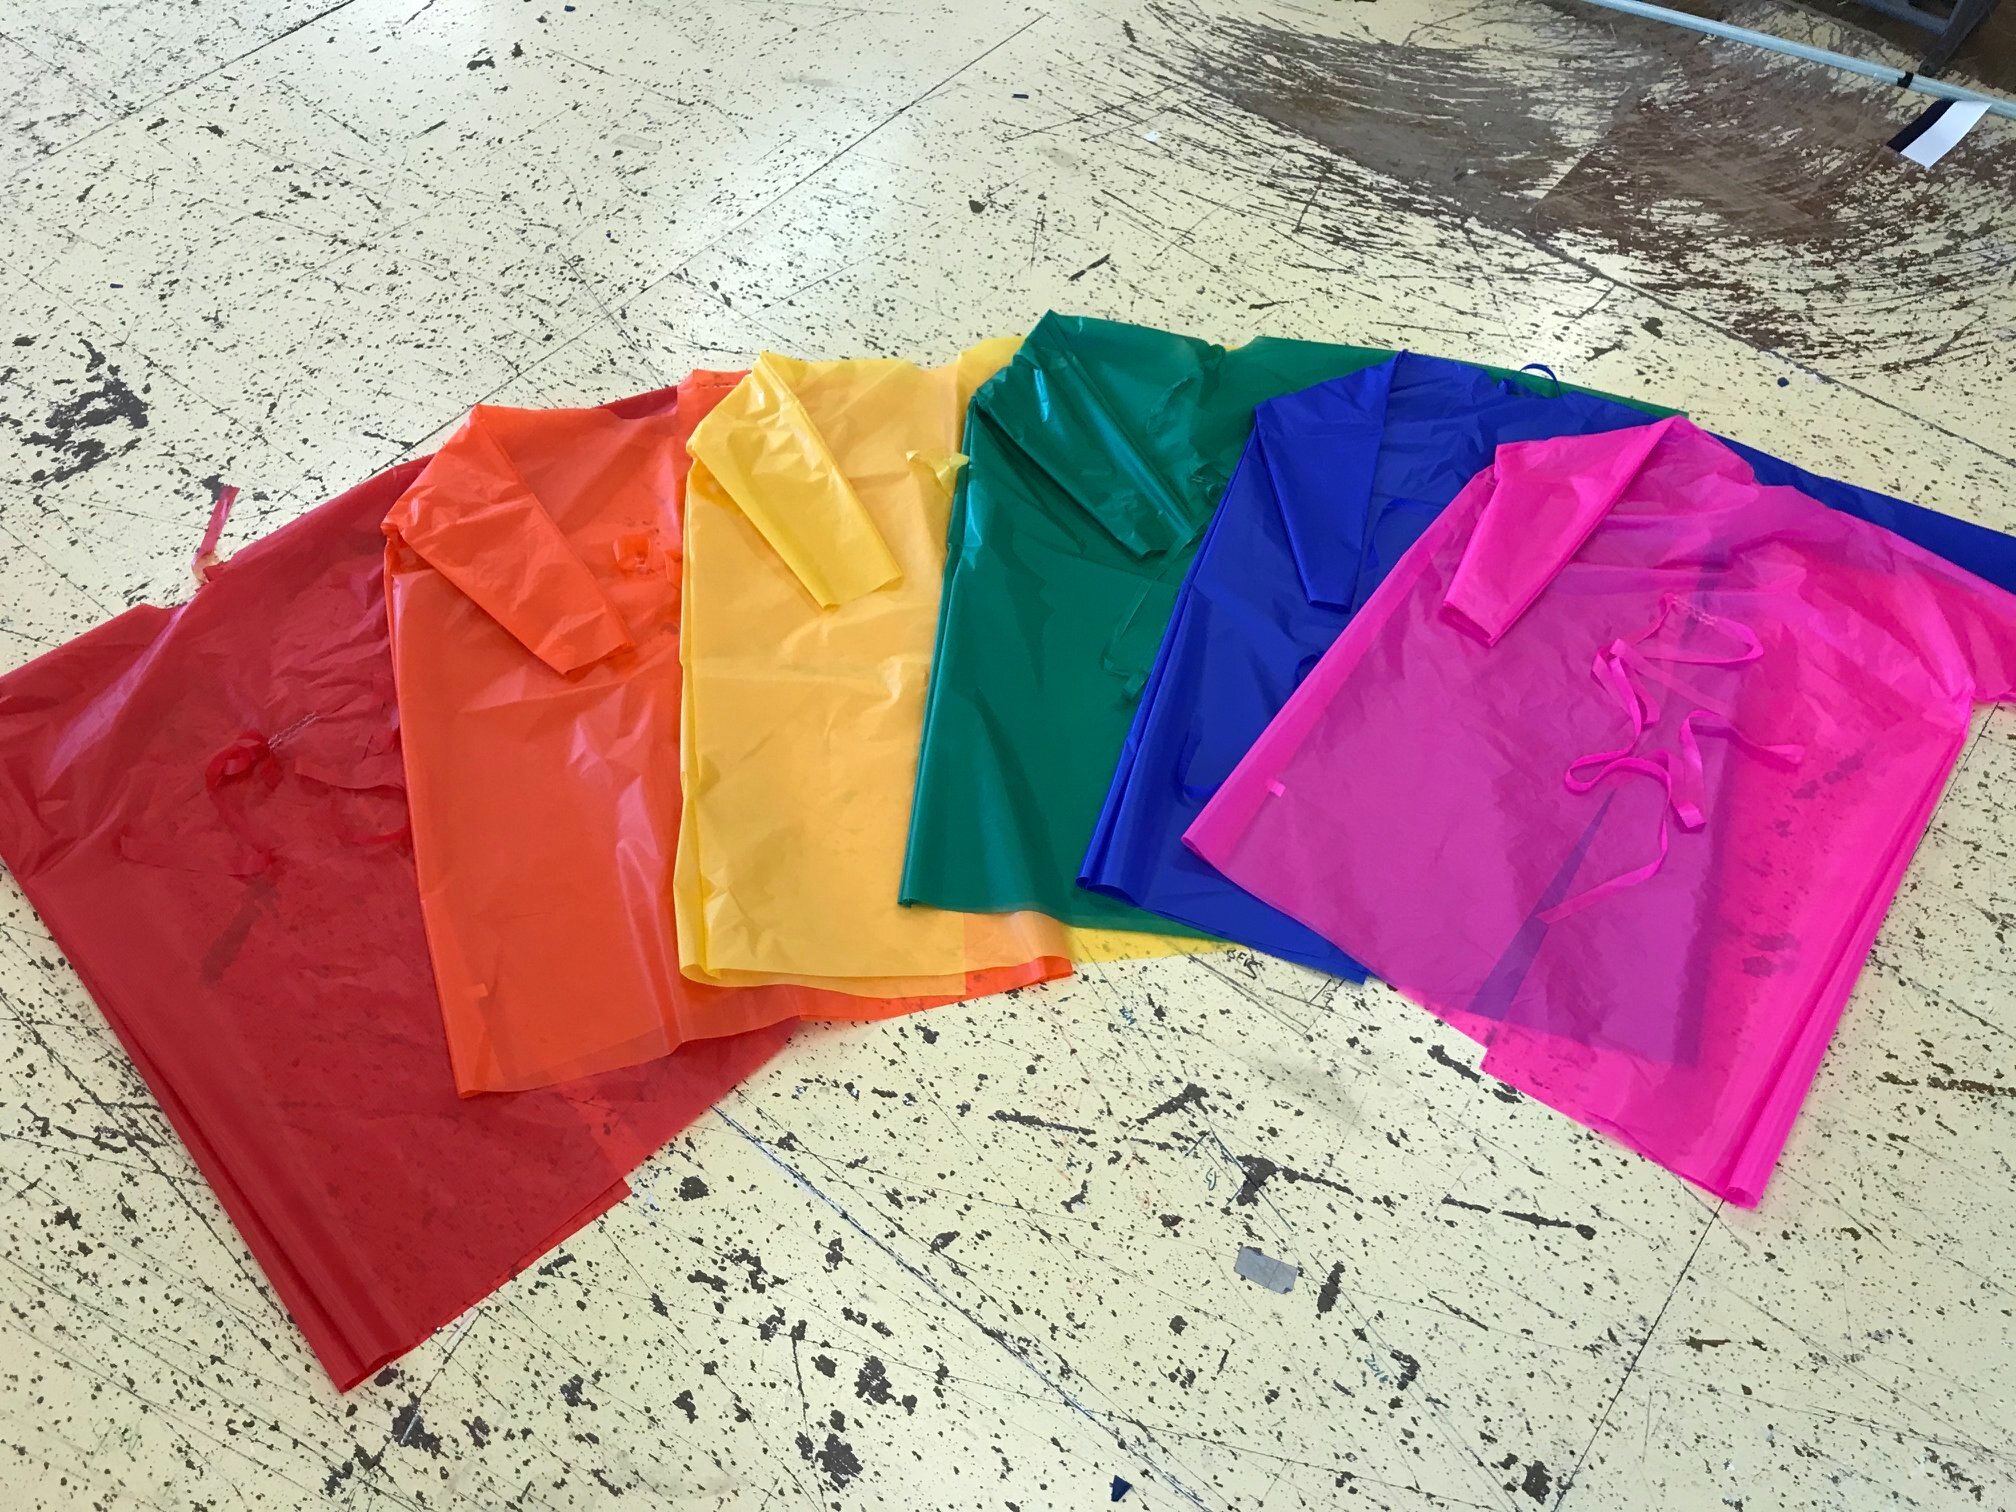 gowns in rainbow colors.jpg